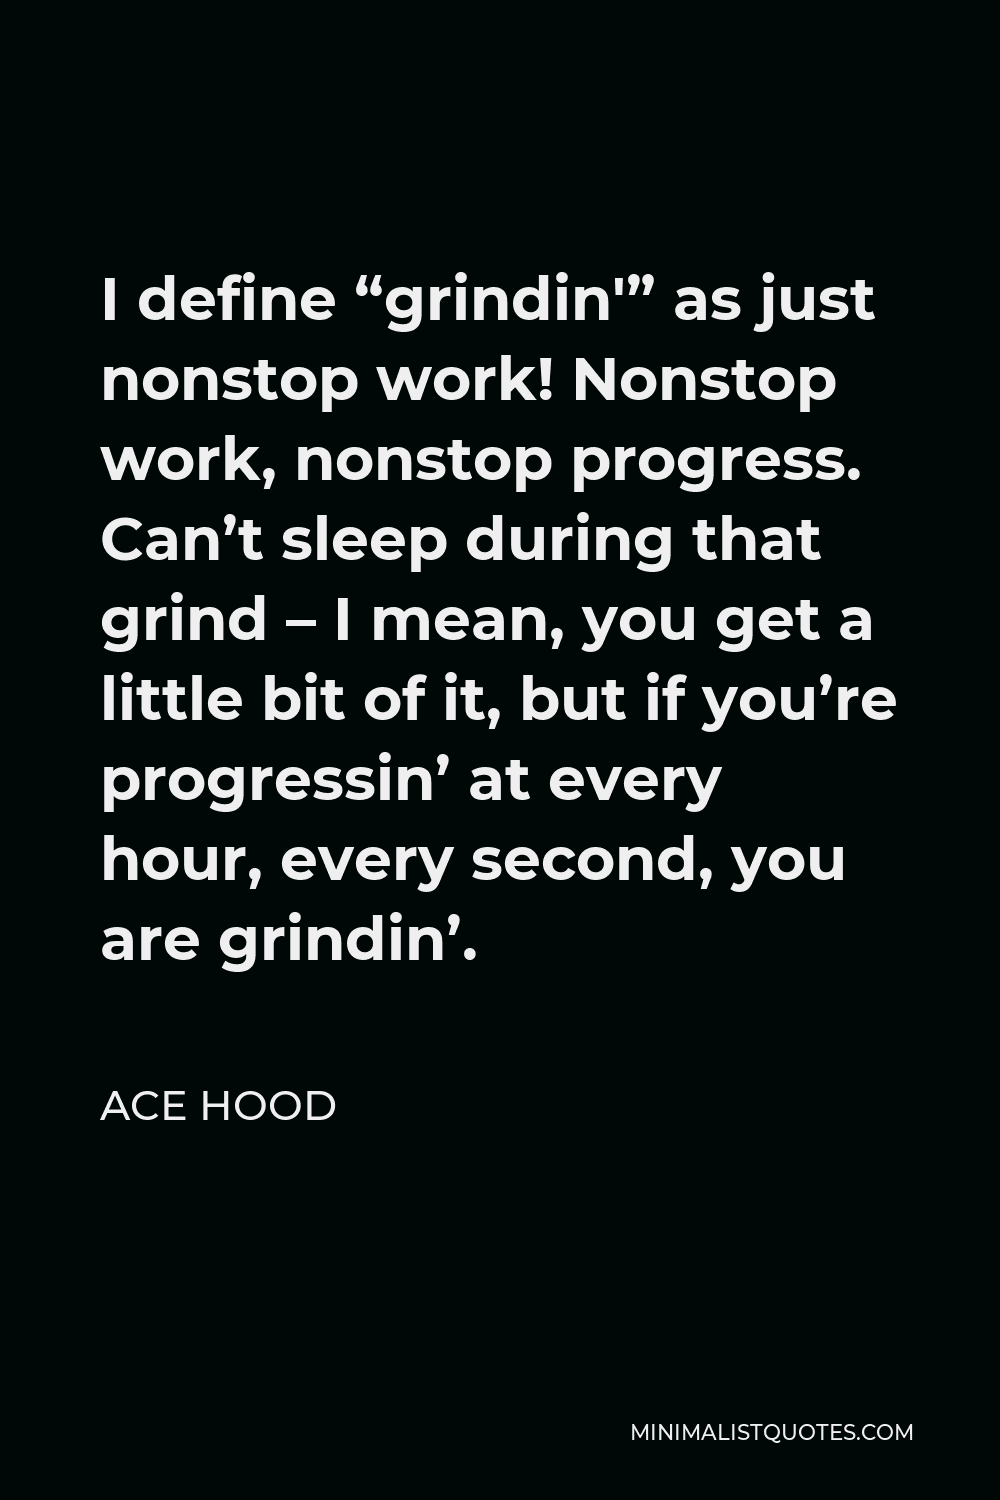 Ace Hood Quote - I define “grindin'” as just nonstop work! Nonstop work, nonstop progress. Can’t sleep during that grind – I mean, you get a little bit of it, but if you’re progressin’ at every hour, every second, you are grindin’.